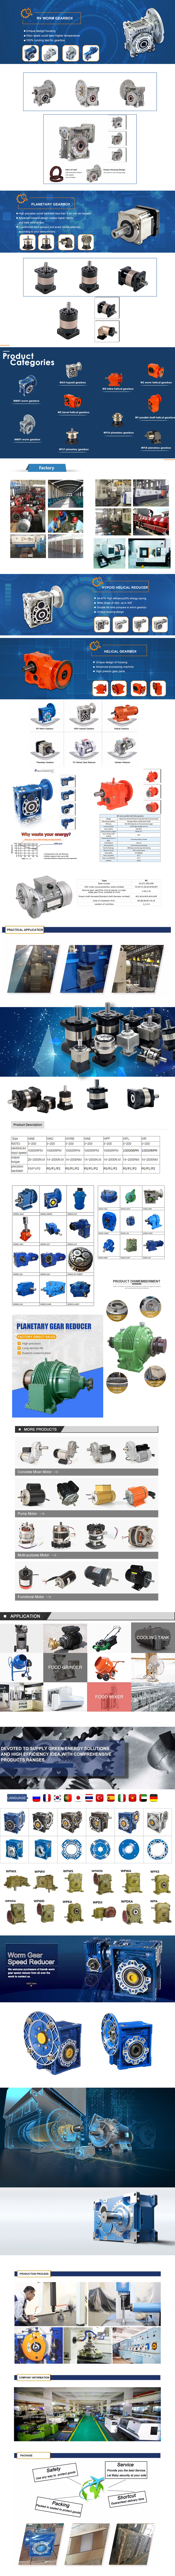   in San Francisco United States  sales   price   shop   near me   near me shop   factory   supplier RV Serial Industrial Power Transmission Worm Gearbox manufacturer   best   Cost   Custom   Cheap   wholesaler 